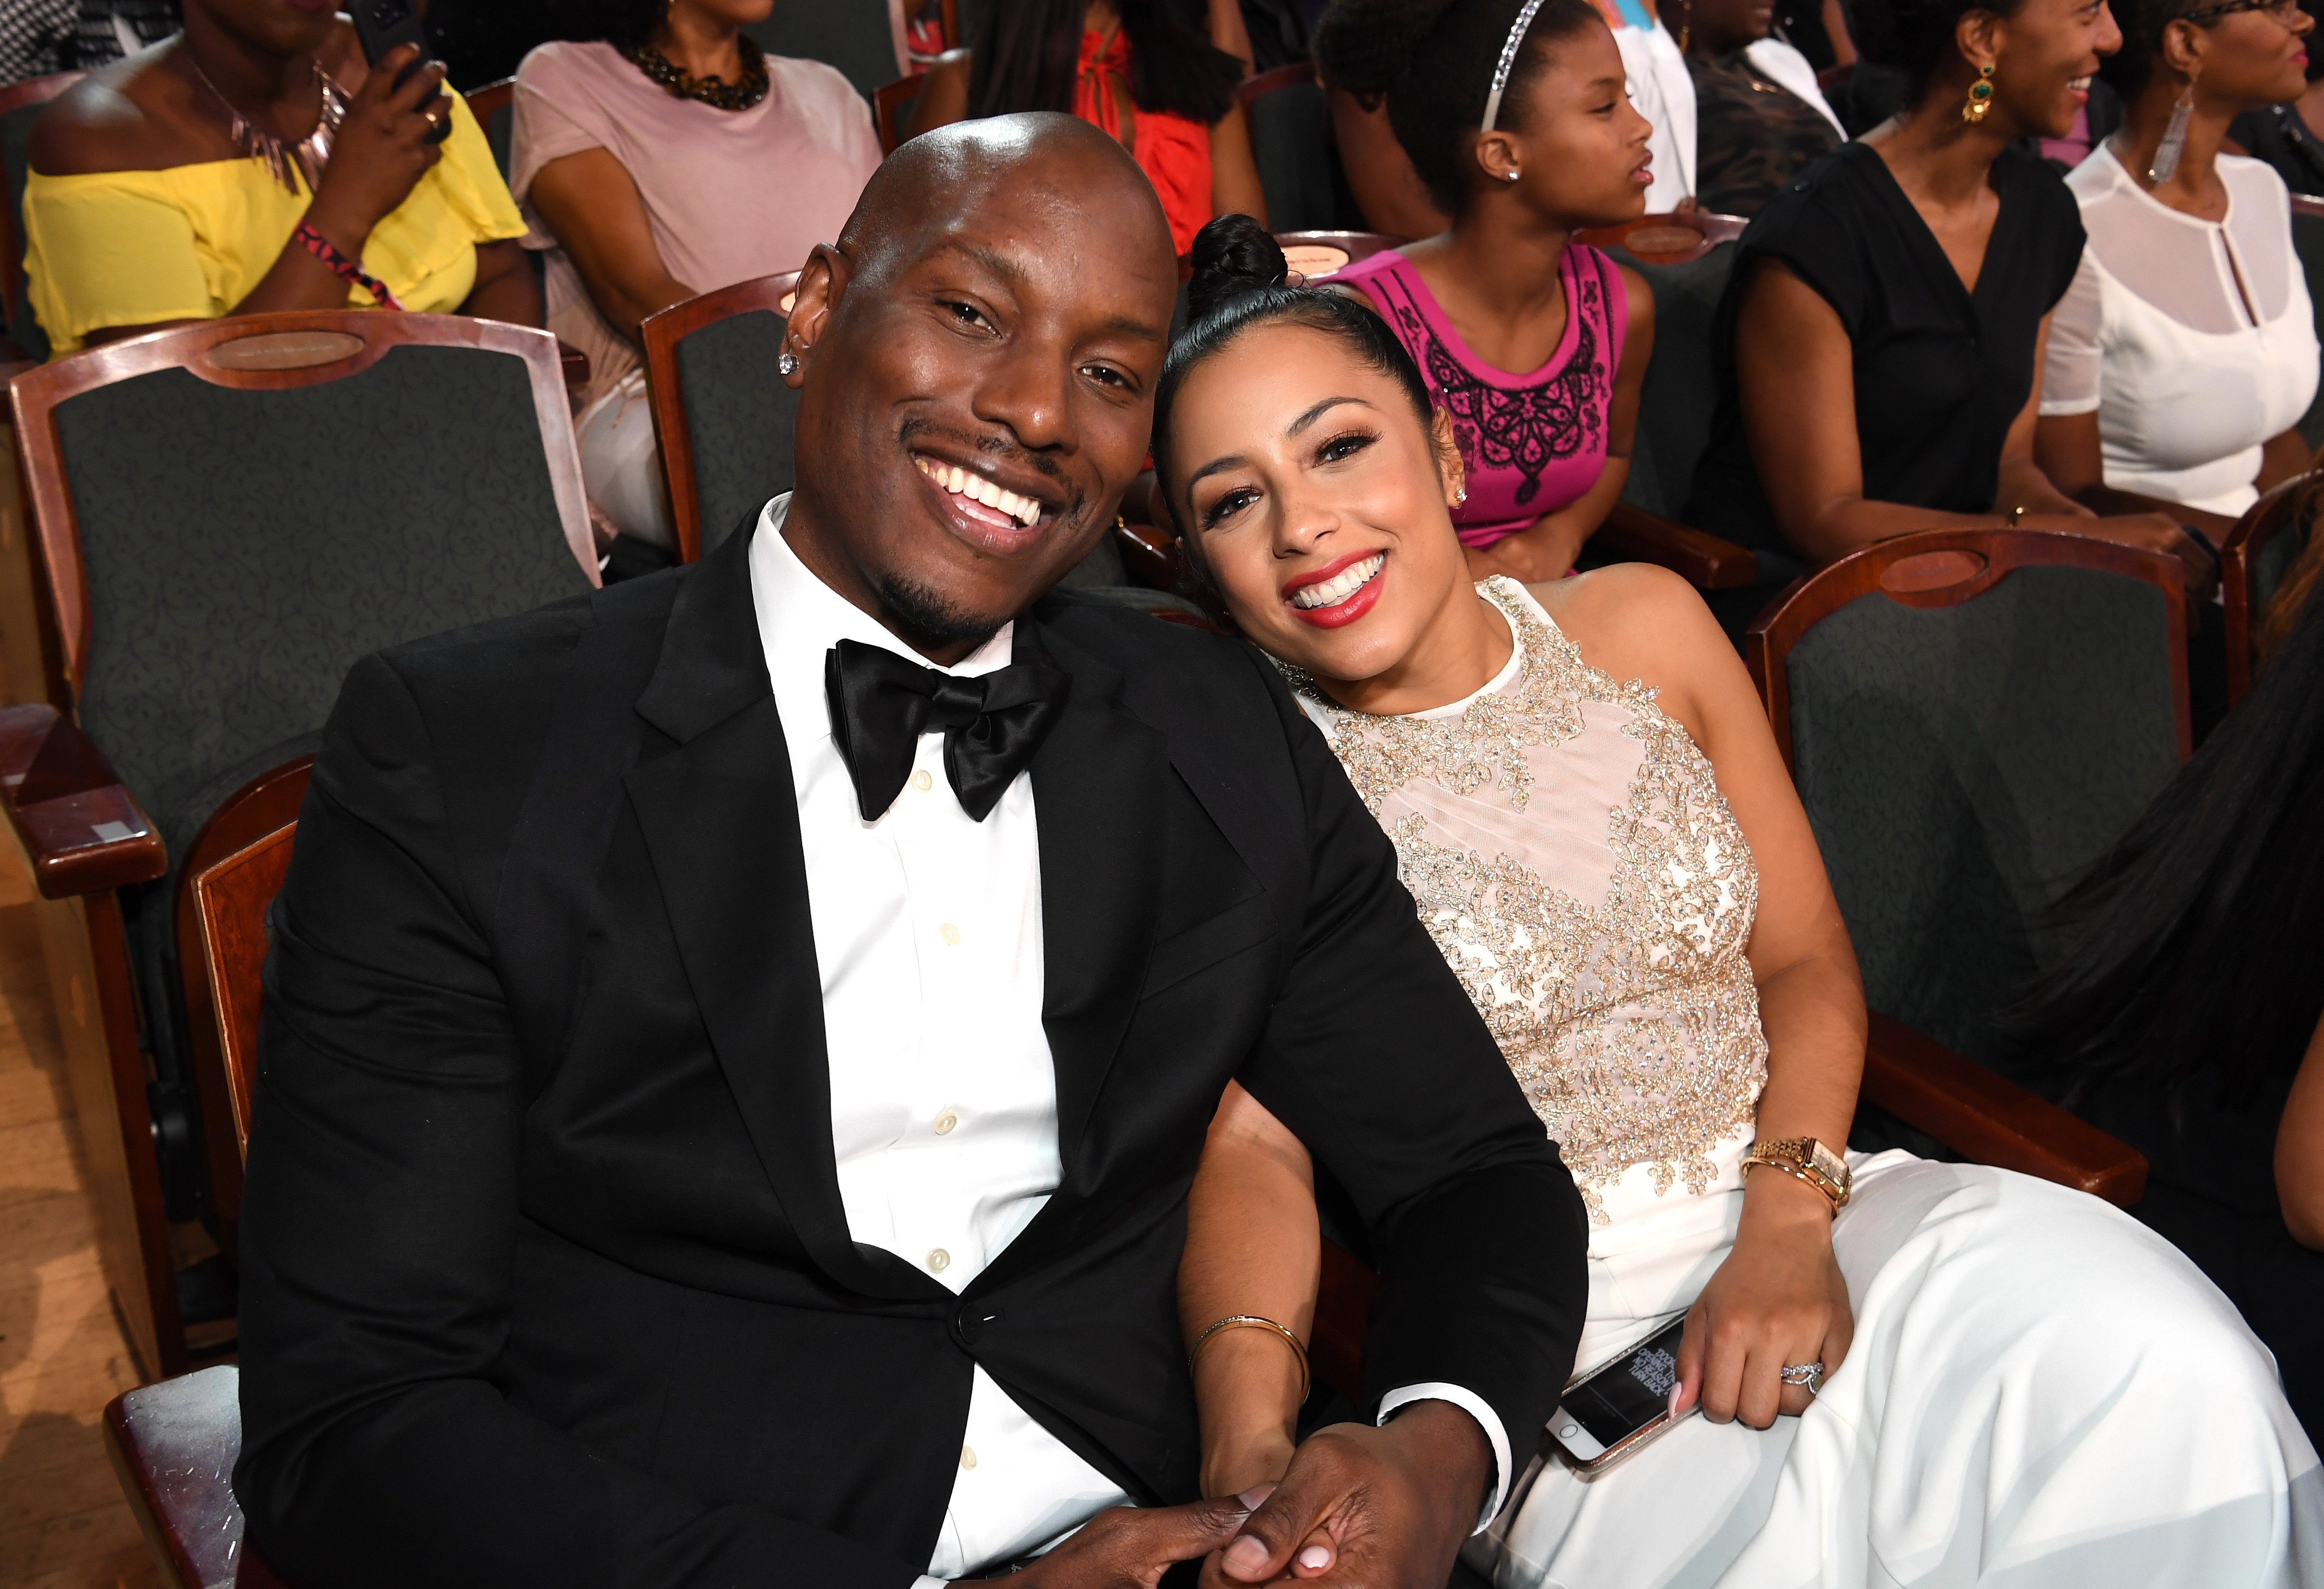 Tyrese Gibson & Samantha Lee Gibson at Black Girls Rock! on Aug. 5, 2017 in New Jersey | Photo: Getty Images